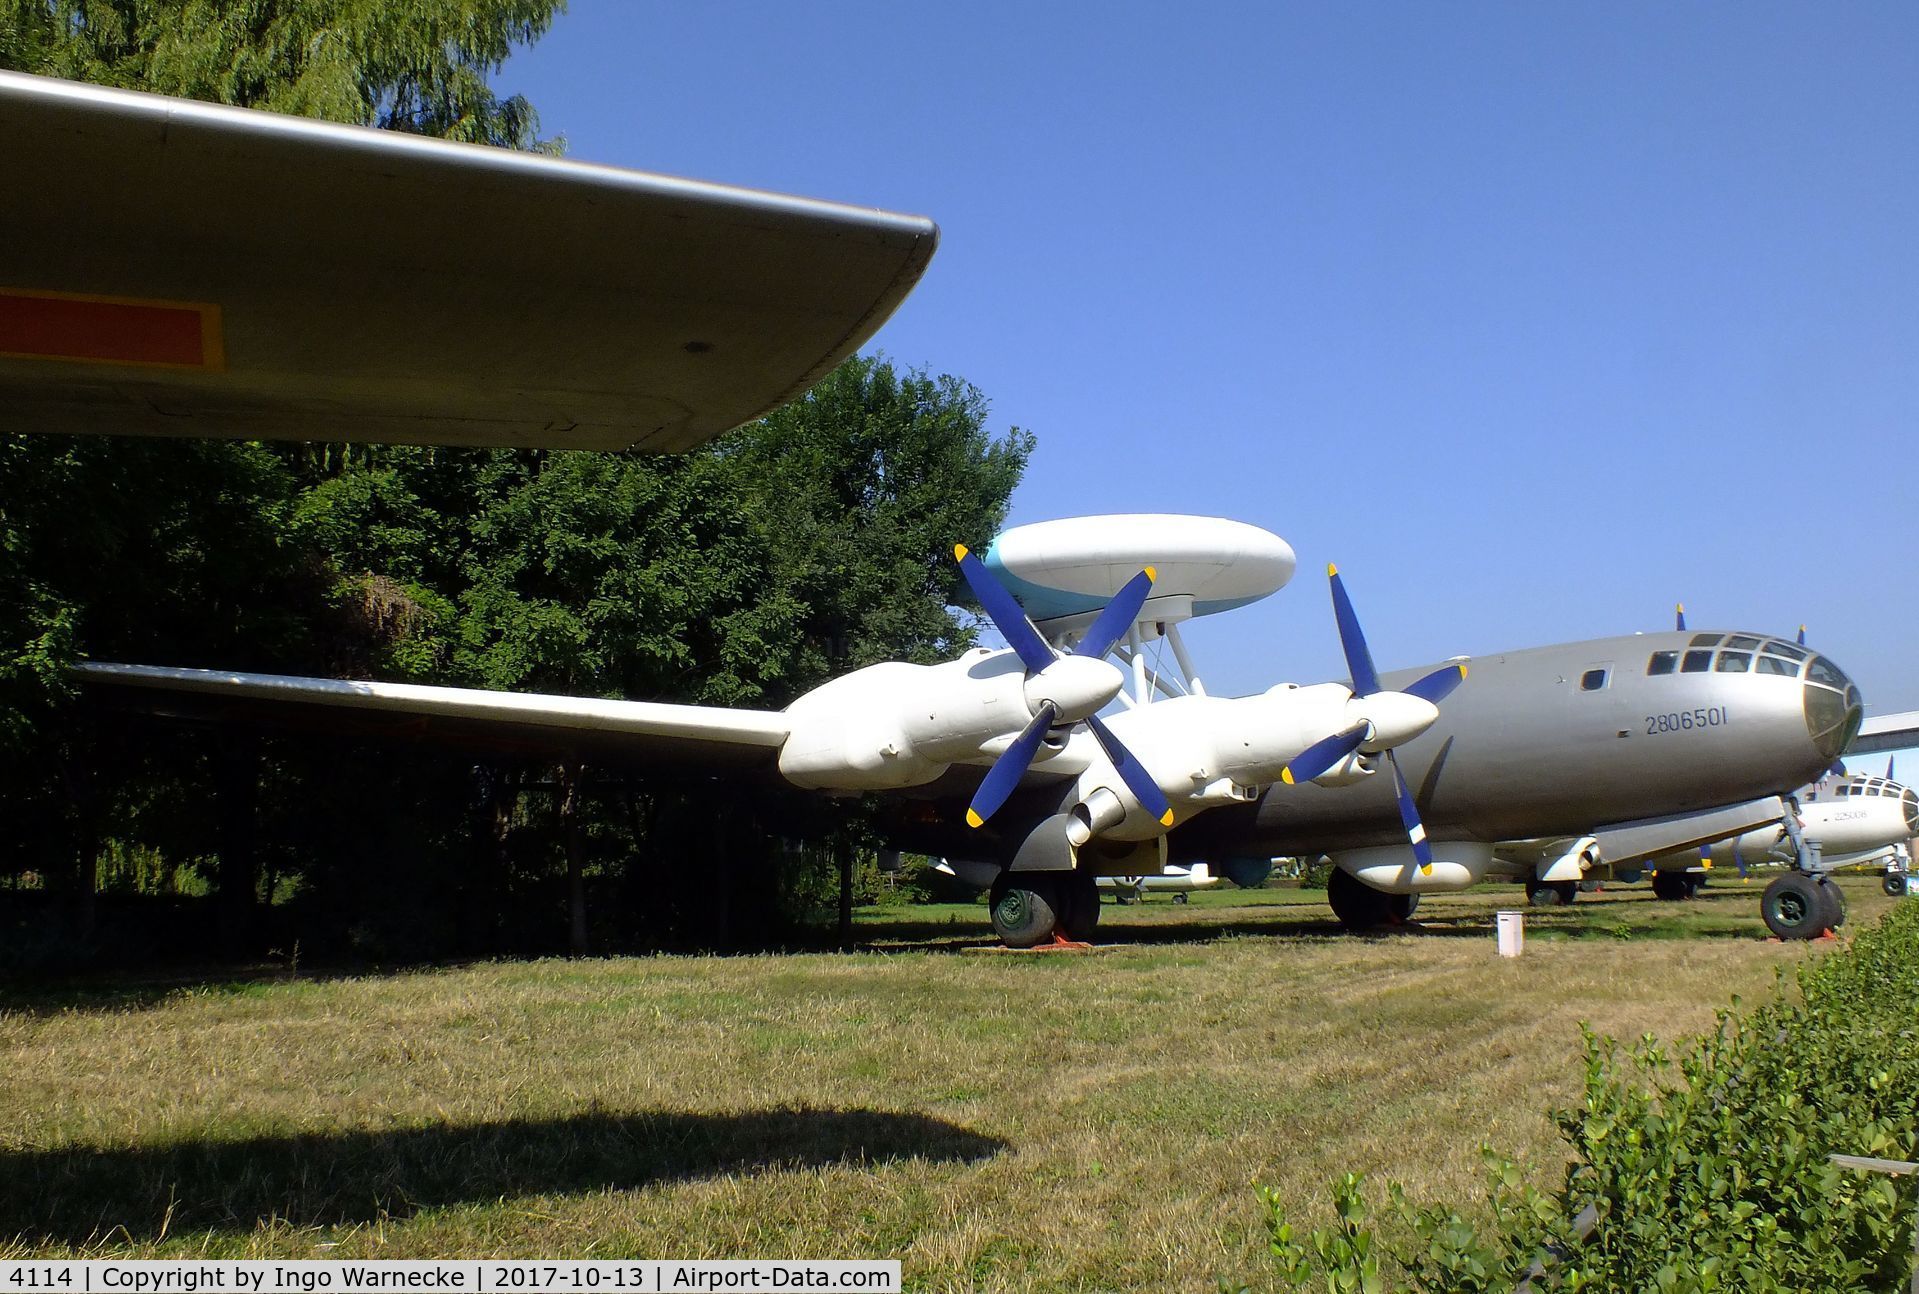 4114, Tupolev Tu-4 C/N 2806501, Tupolev Tu-4 BULL (re-engined with WJ-6 turboprops) as an experimental AWACS-testbed at the China Aviation Museum Datangshan